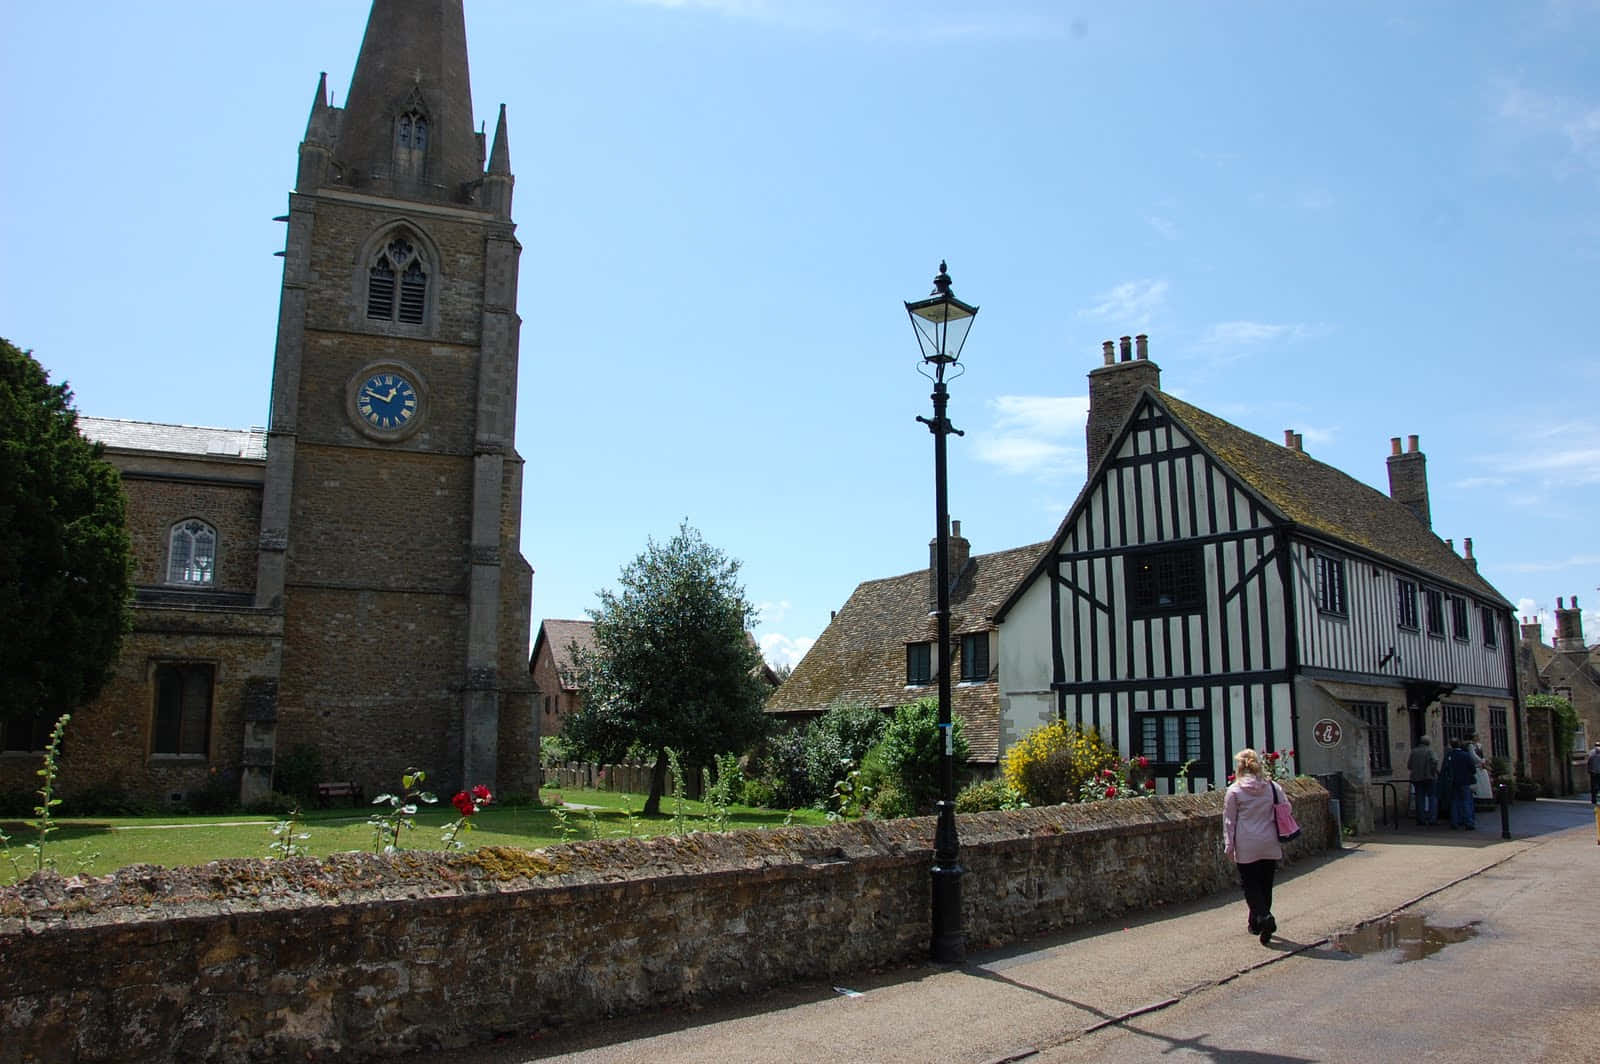 Ely Historic Churchand Timber Framed Building Wallpaper